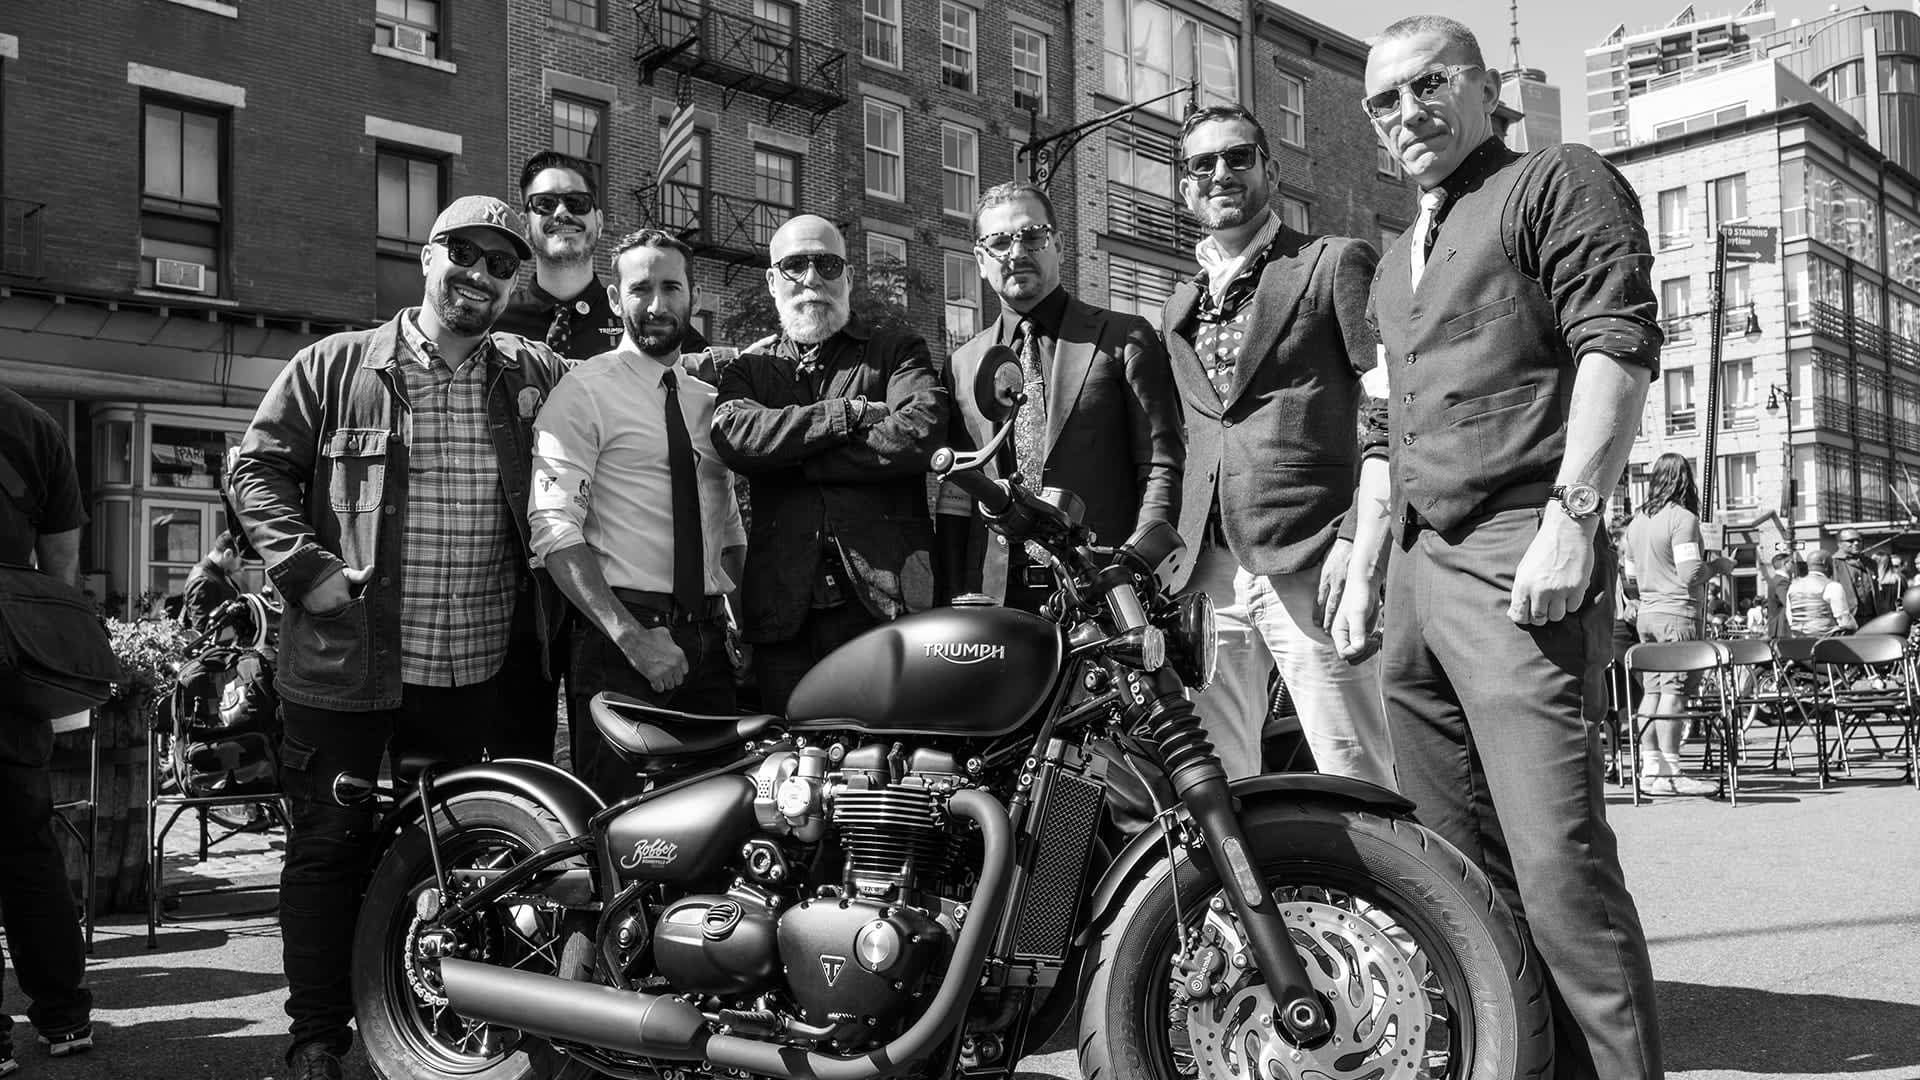 Distinguished gentlemen ready for their ride with Triumph in shot